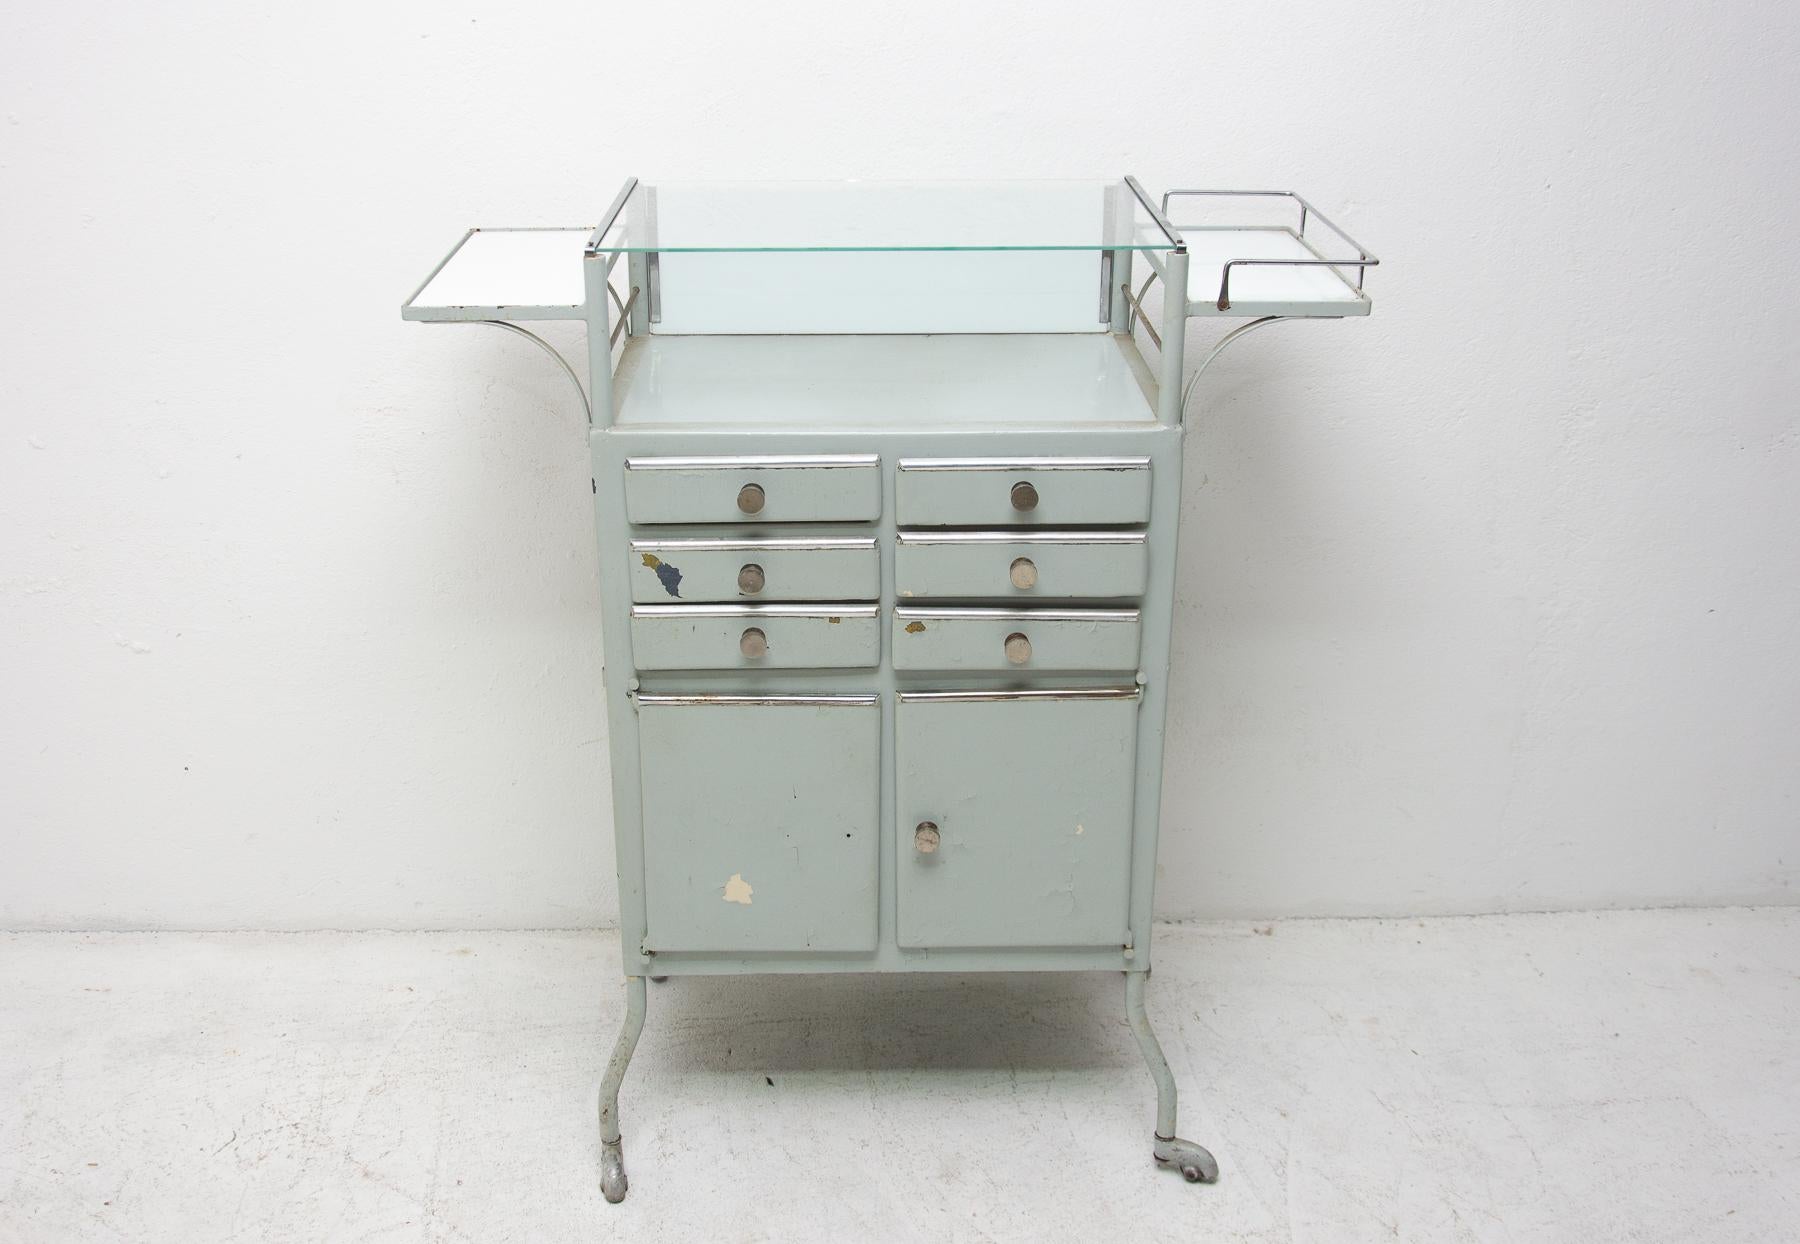 Metal and glass medical/apothecary cabinet on wheels with nice patina.
This cabinet was made in the former Czechoslovakia in the 1960s.
One upper glass shelves, two on the sides, six drawers and bottom storage space
Original paint, in good vintage